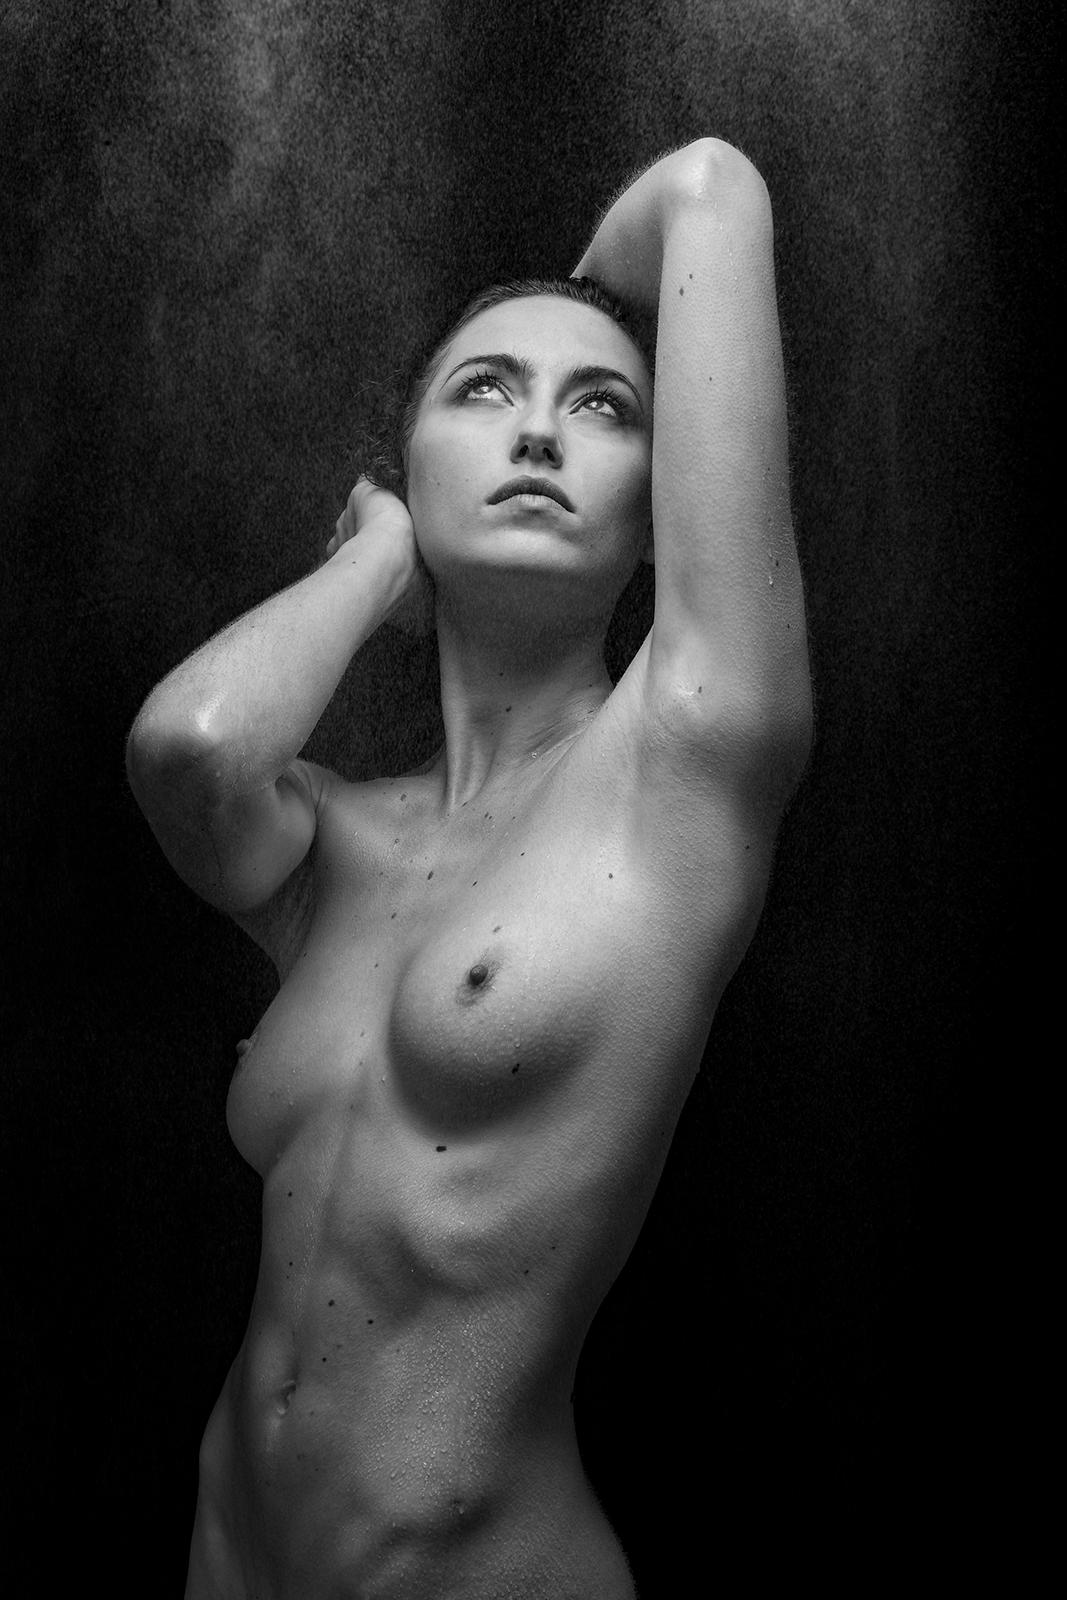 Mist - Signed limited edition nude art print, Black White Photo, Sensual model